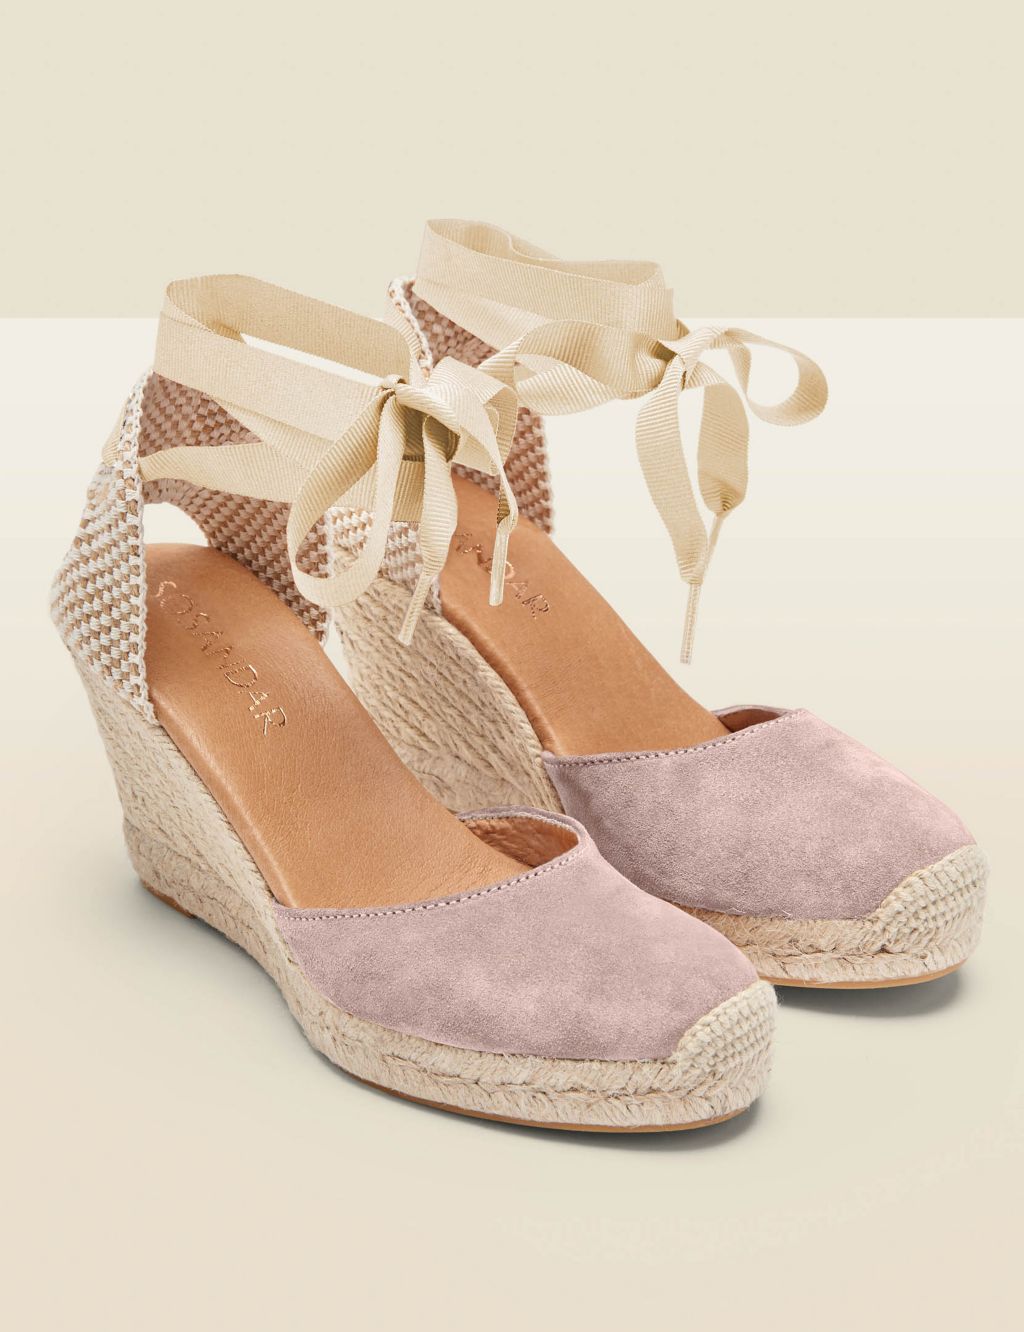 Suede Lace Up Wedge Espadrilles image 2